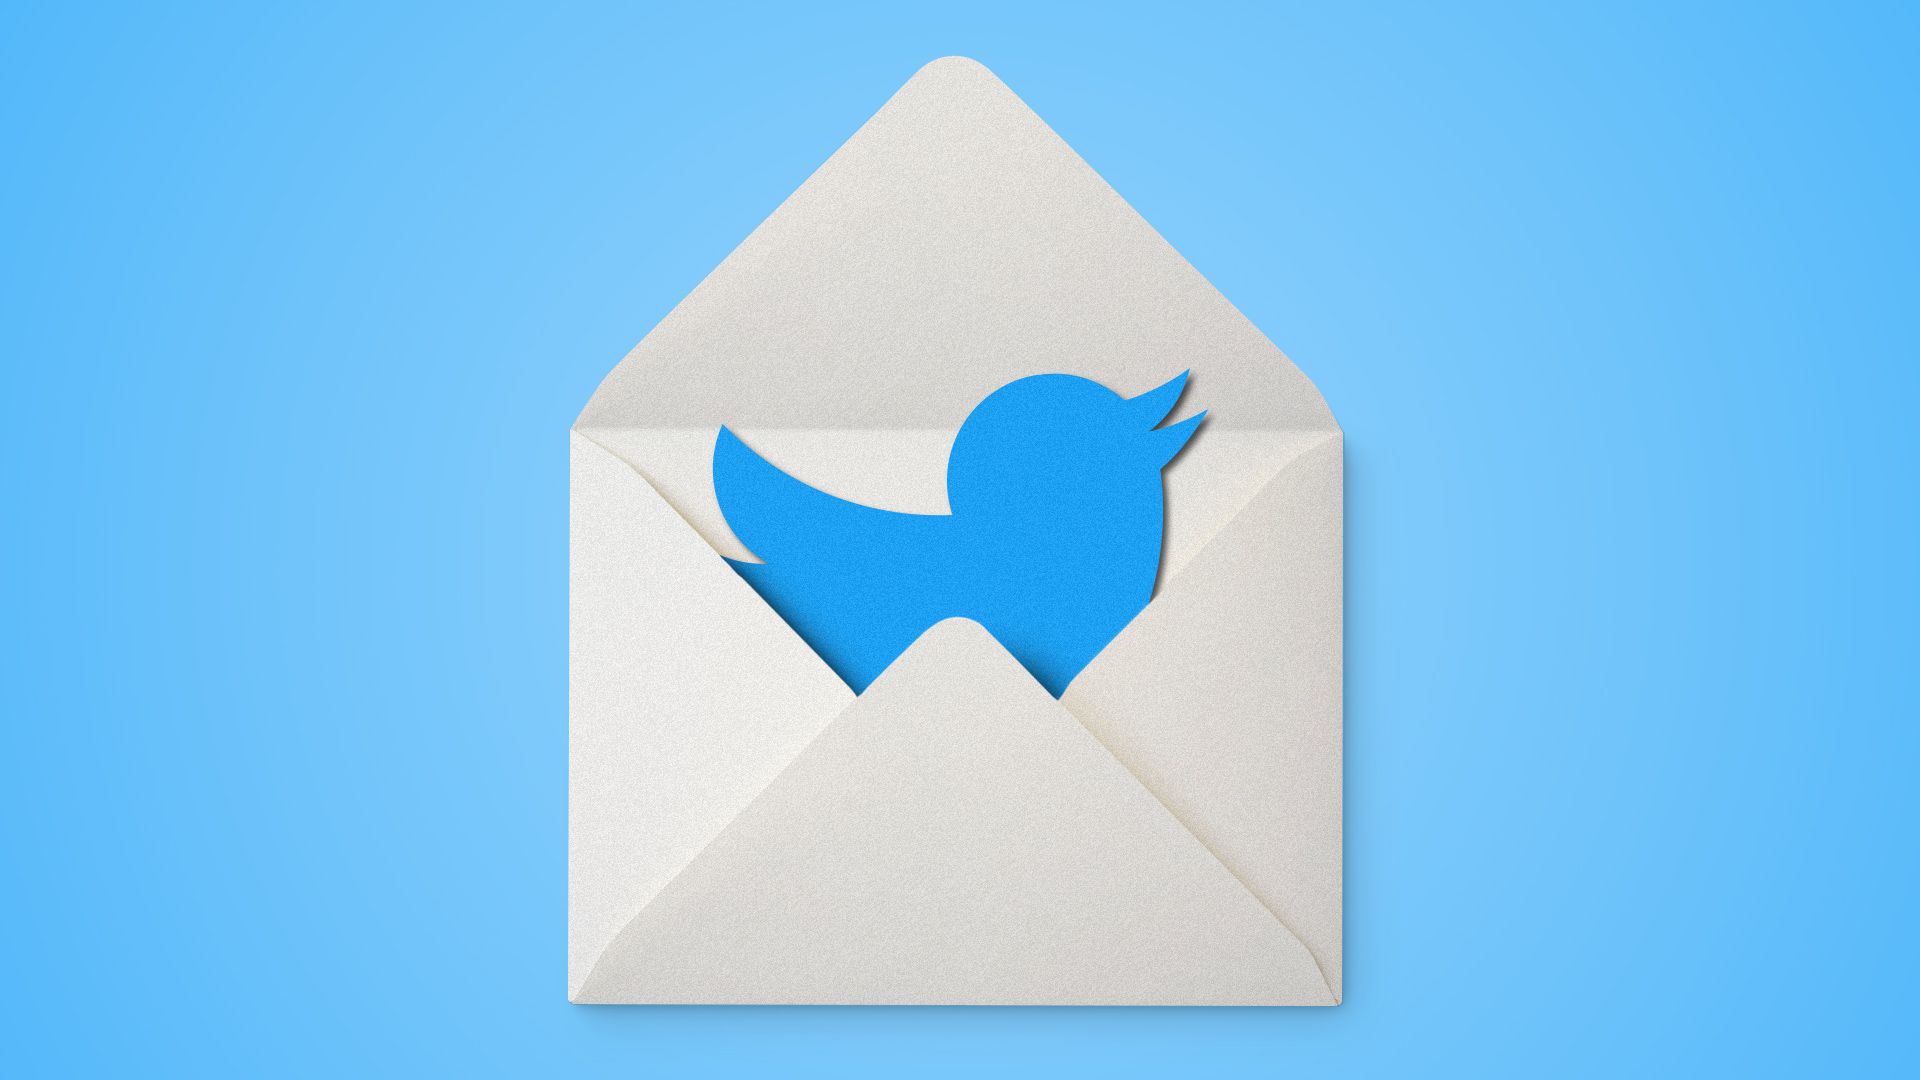 Twitter acquiring newsletter publishing company Revue - Axios